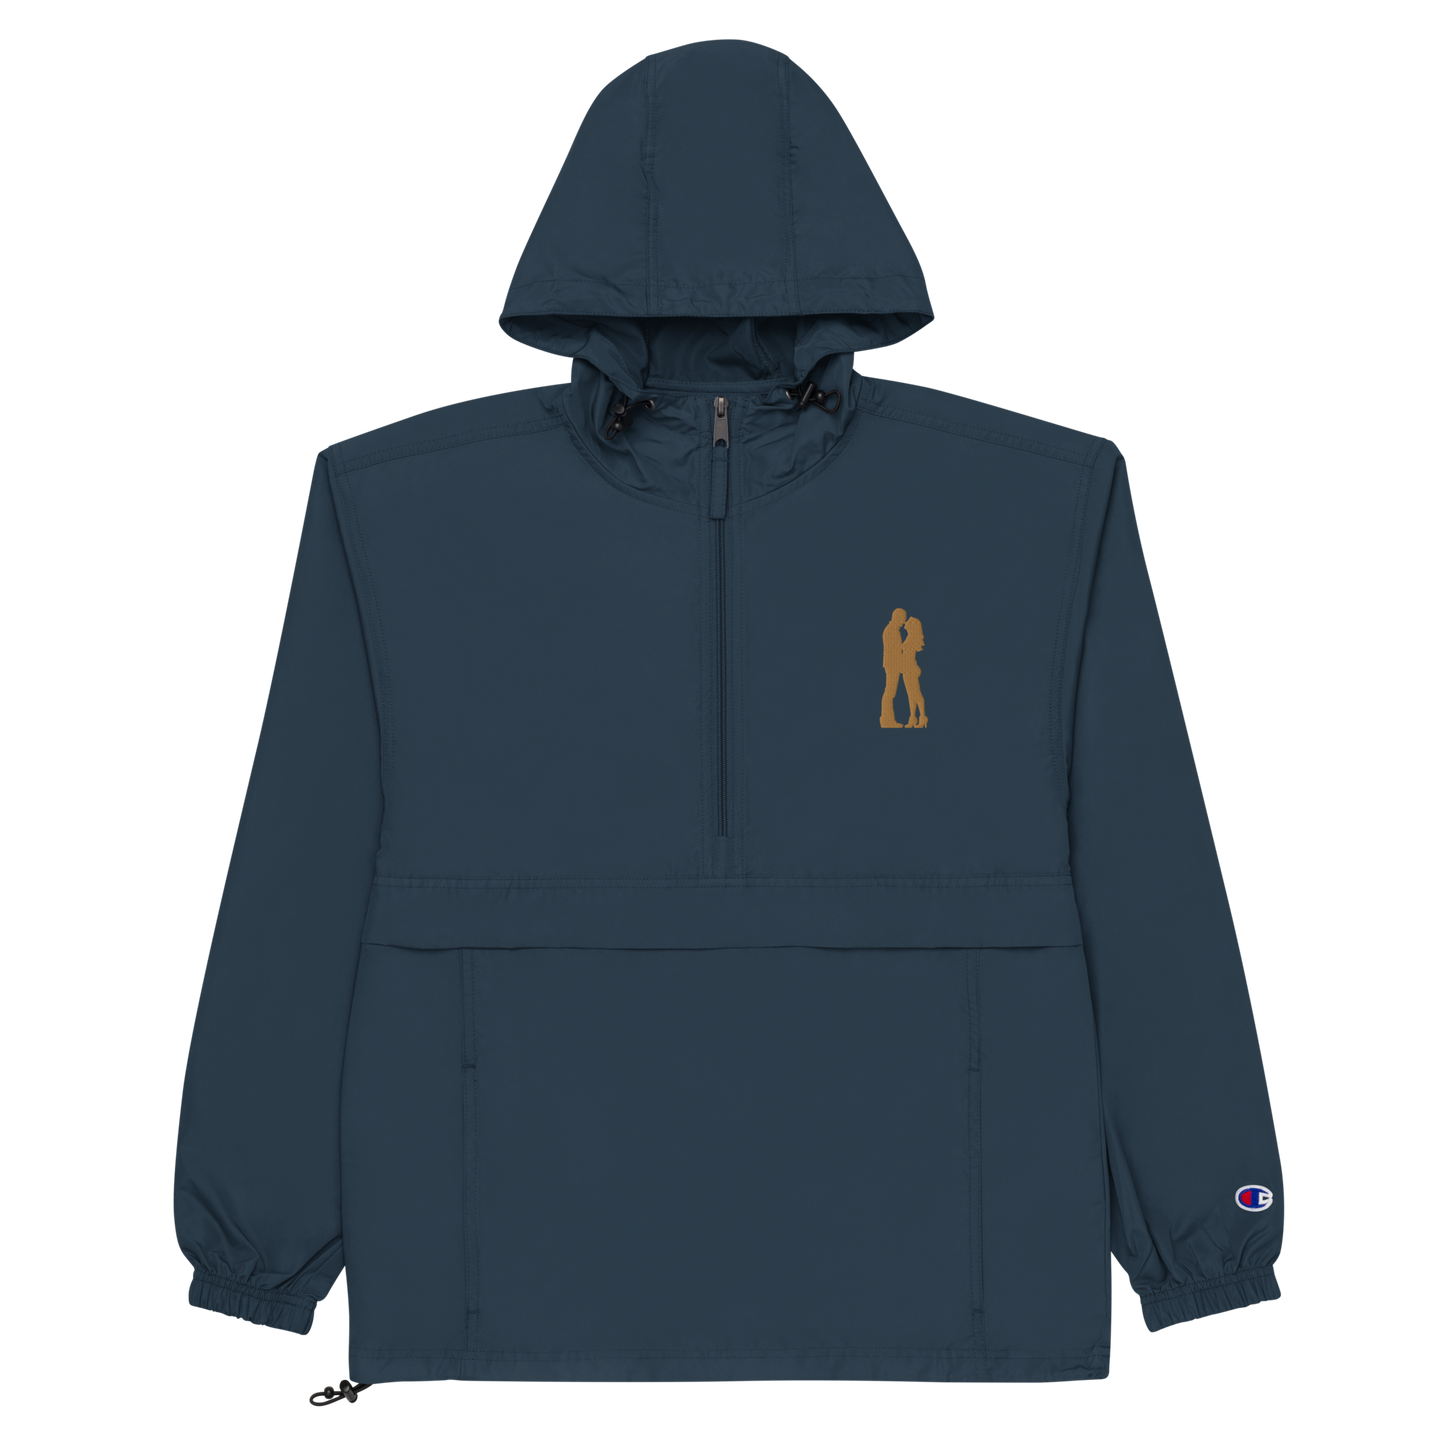 INTIMACY Embroidered Champion Jacket